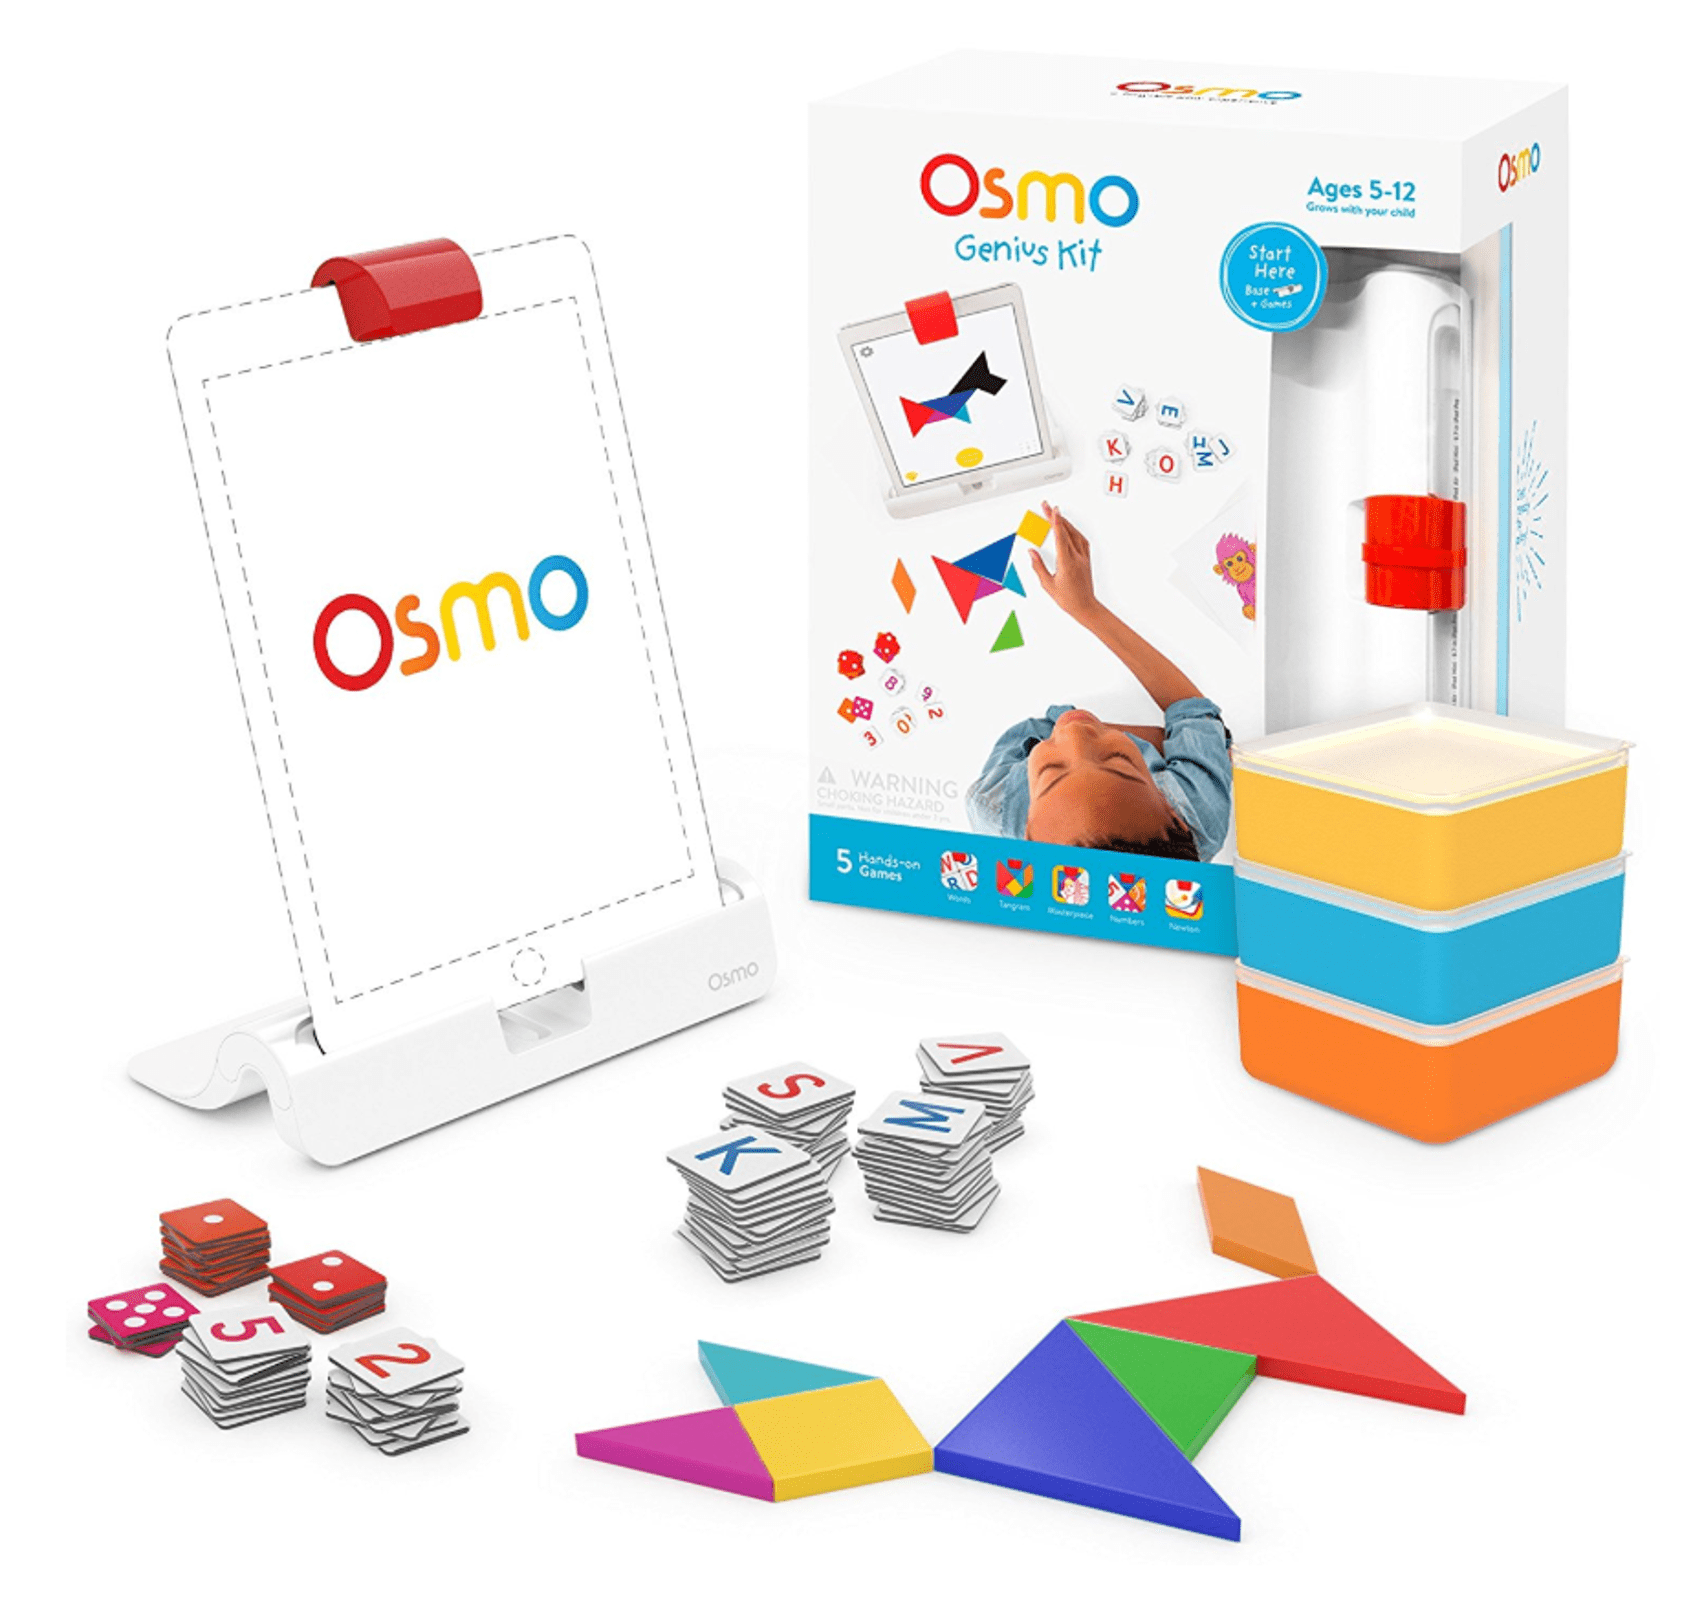 Osmo 90100008 Genius Kit Fire Tablet Base and 5 Hands-on Games for sale online